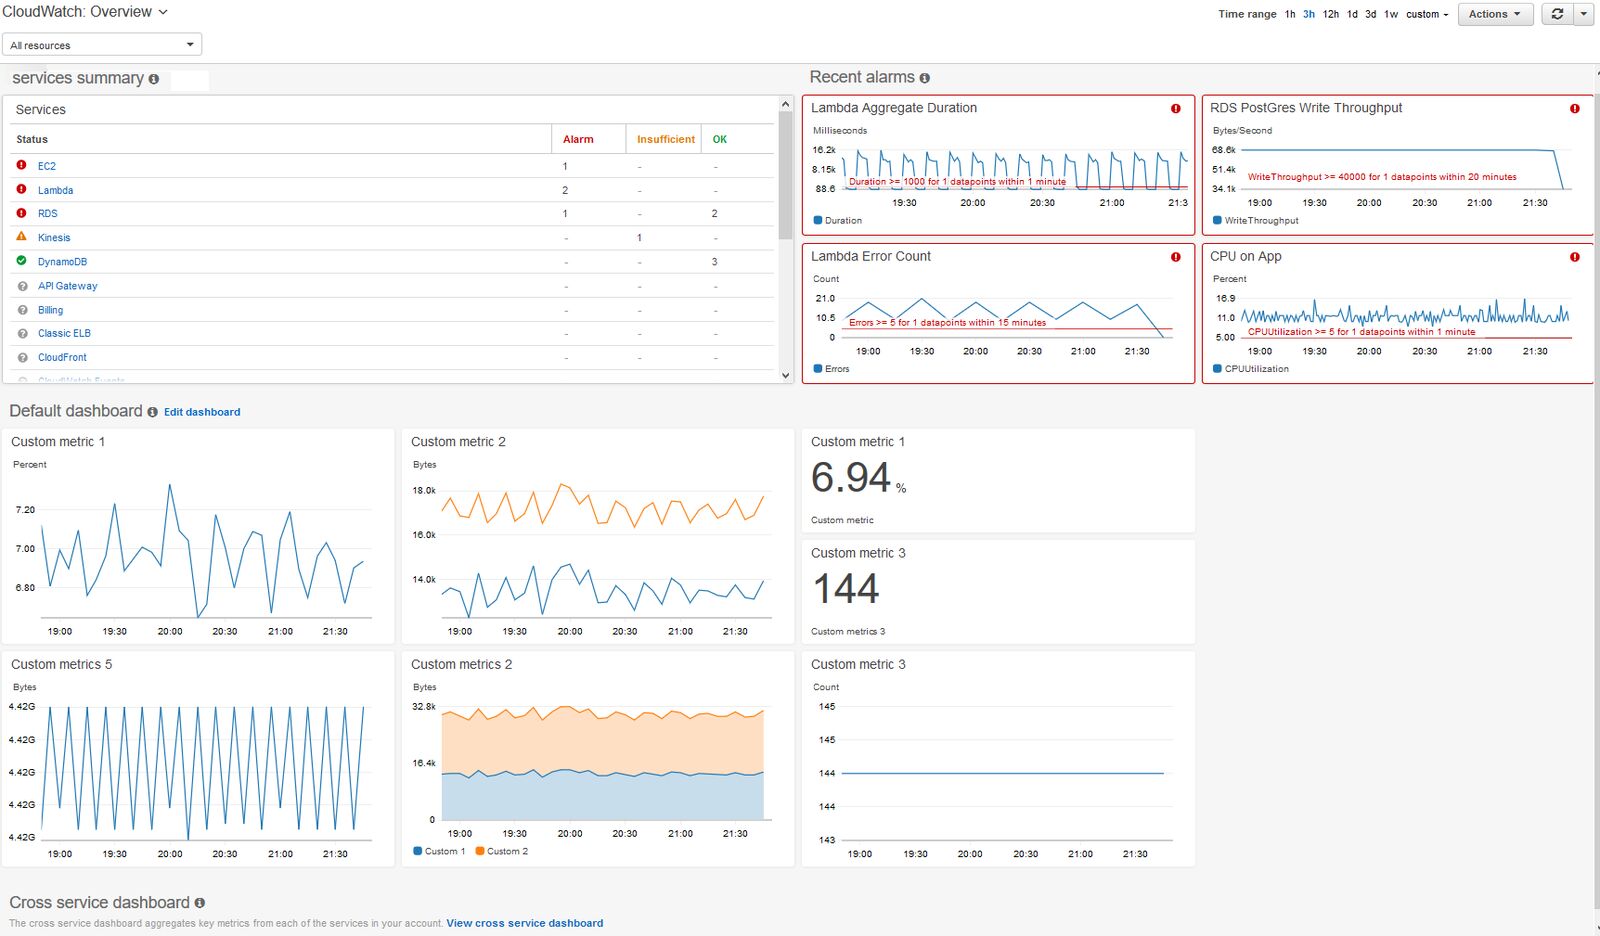 CloudWatch overview dashboard